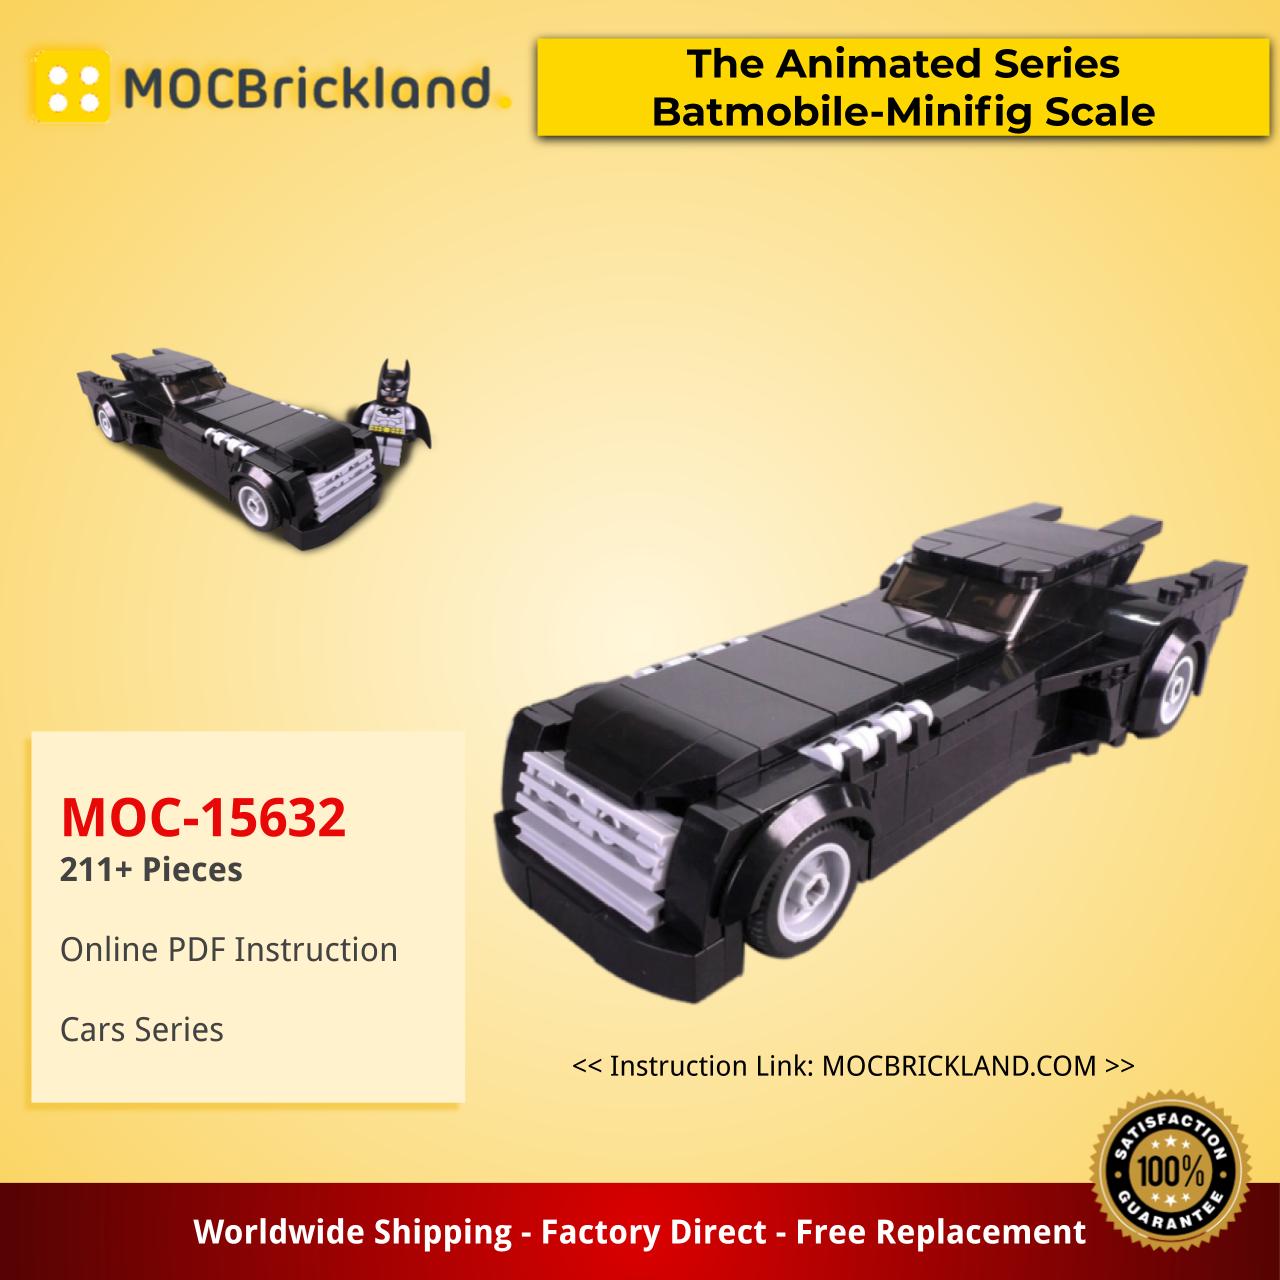 MOCBRICKLAND MOC-15632 The Animated Series Batmobile-Minifig Scale (1992-1995)